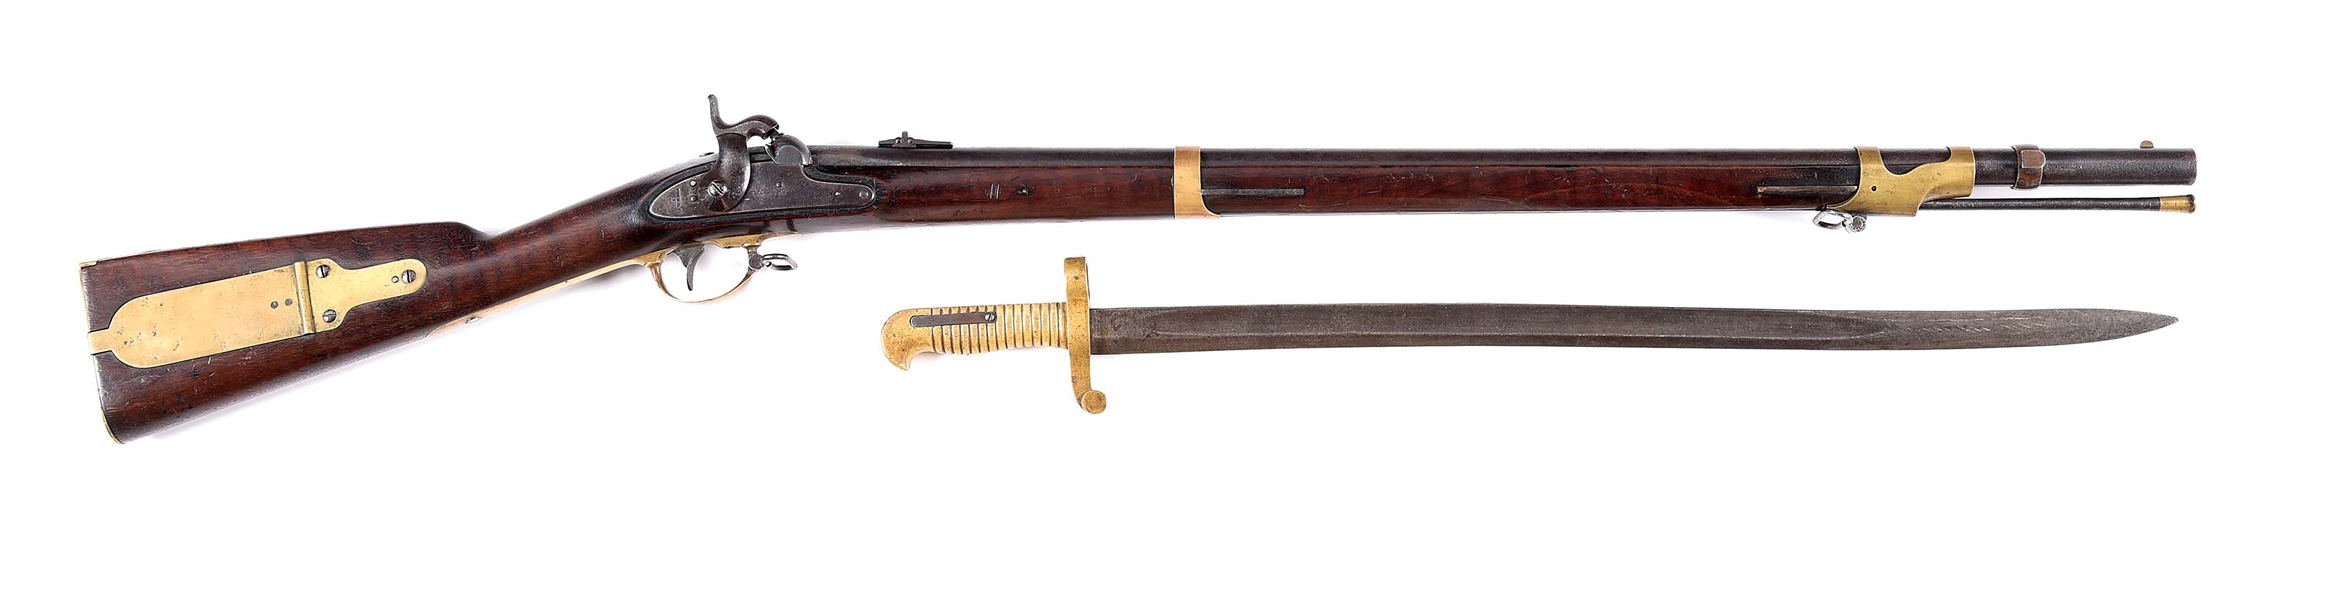 (A) COLT ALTERATION ROBBINS & LAWRENCE US M1841 MISSISSIPPI RIFLE WITH SABER BAYONET.